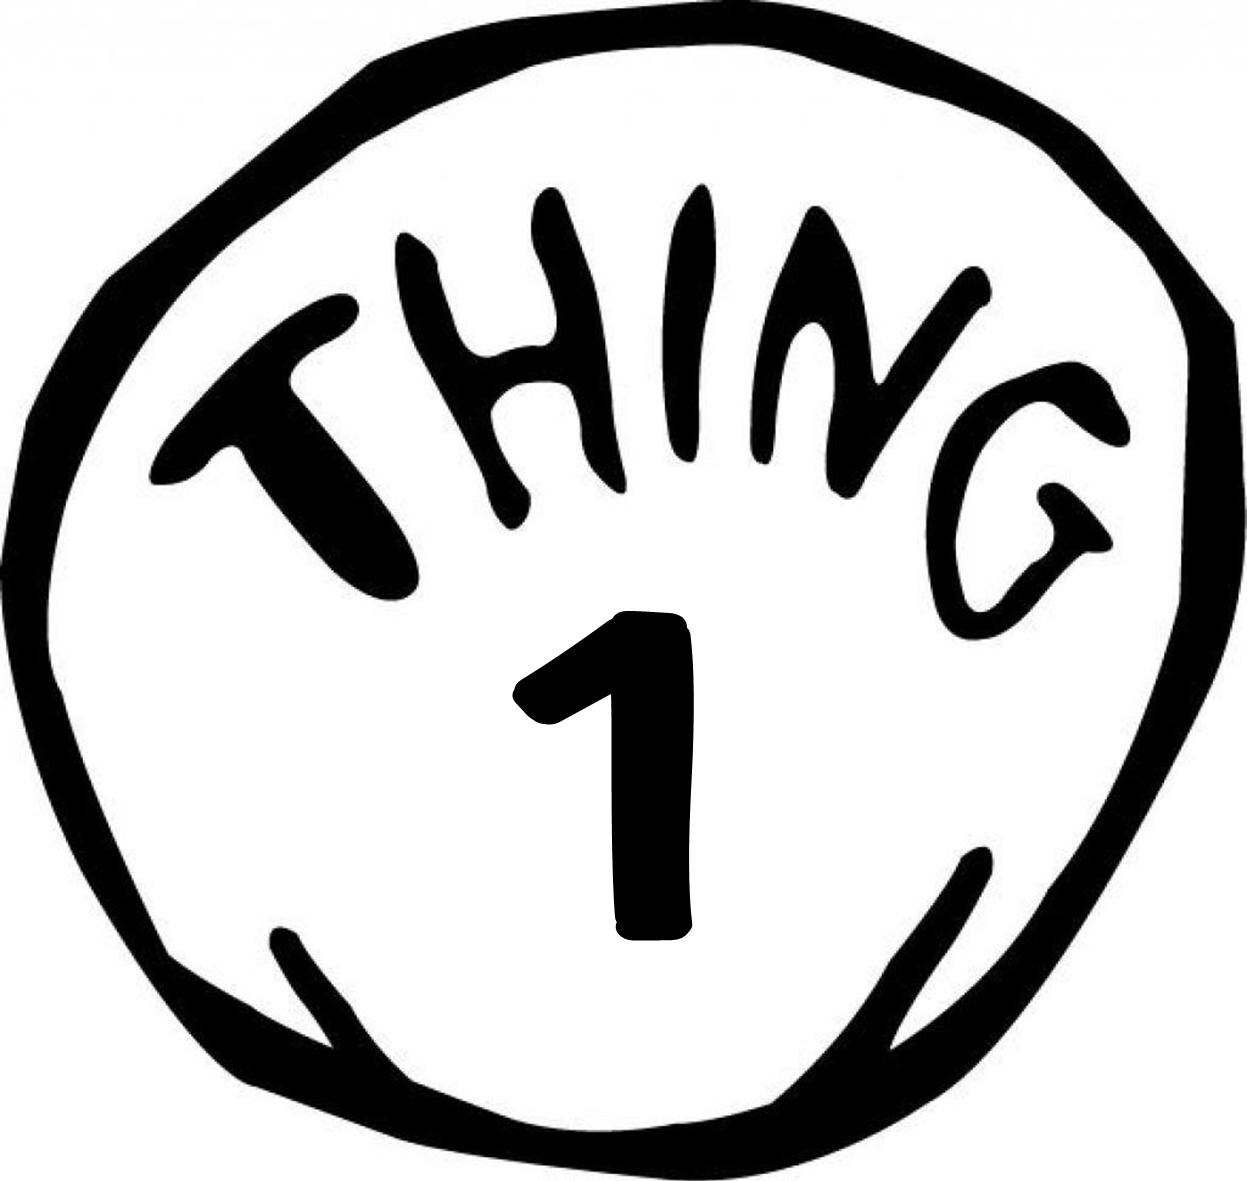 thing-1-and-thing-2-coloring-pages-free-download-on-clipartmag